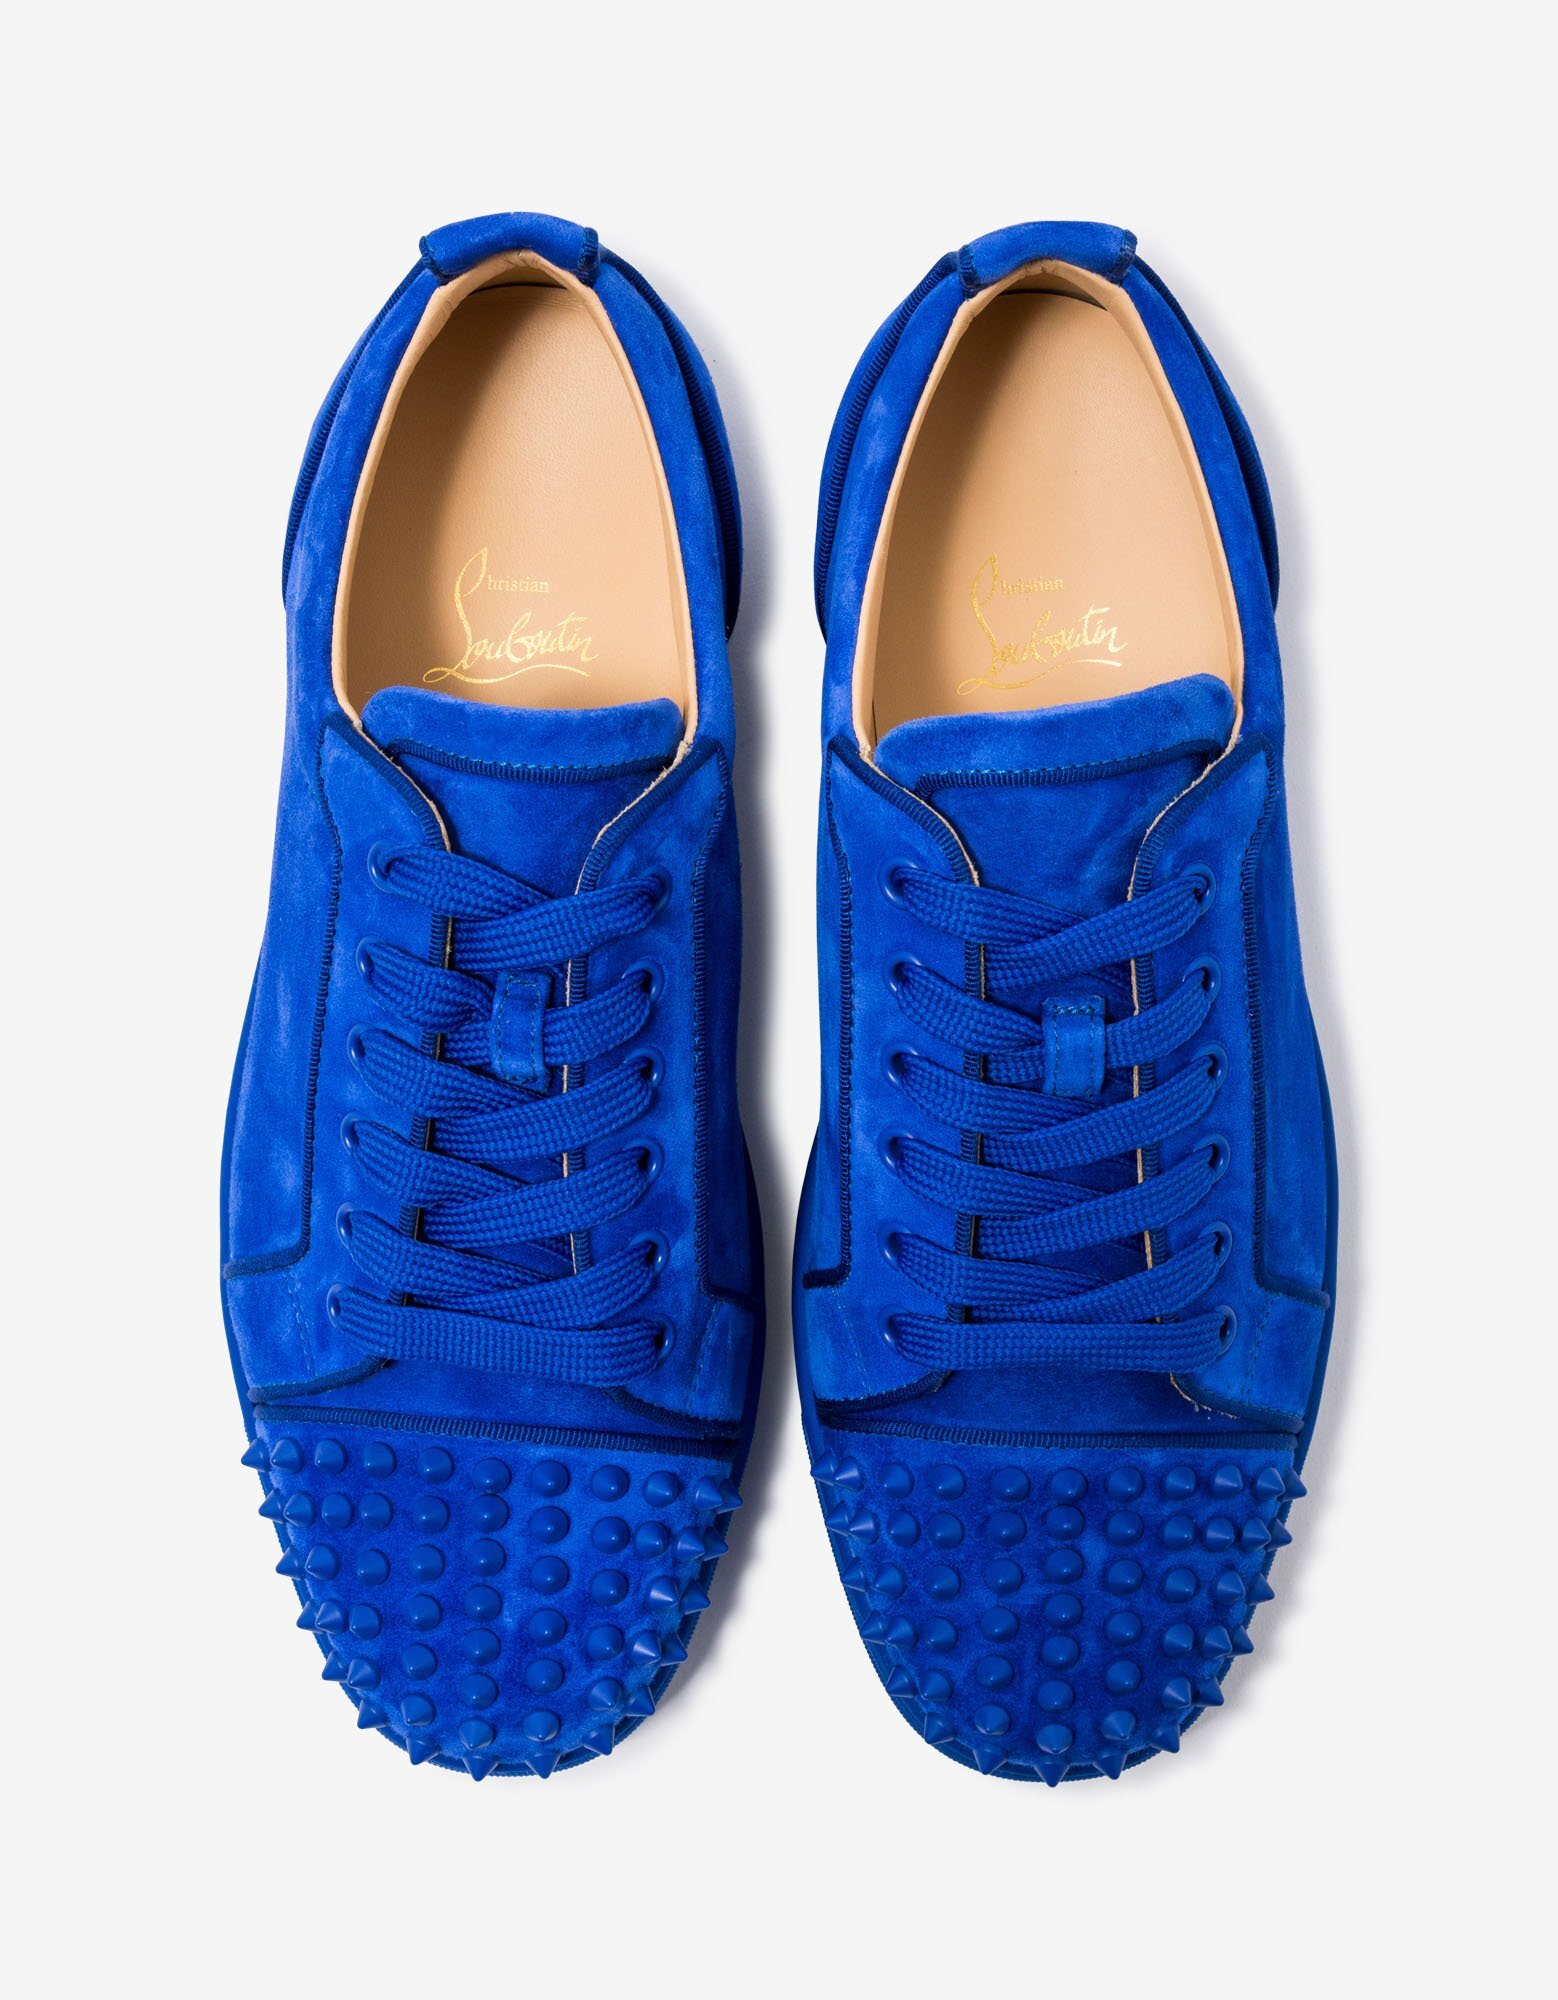 Louis junior spike low trainers Christian Louboutin Turquoise size 42 EU in  Suede - 35302166